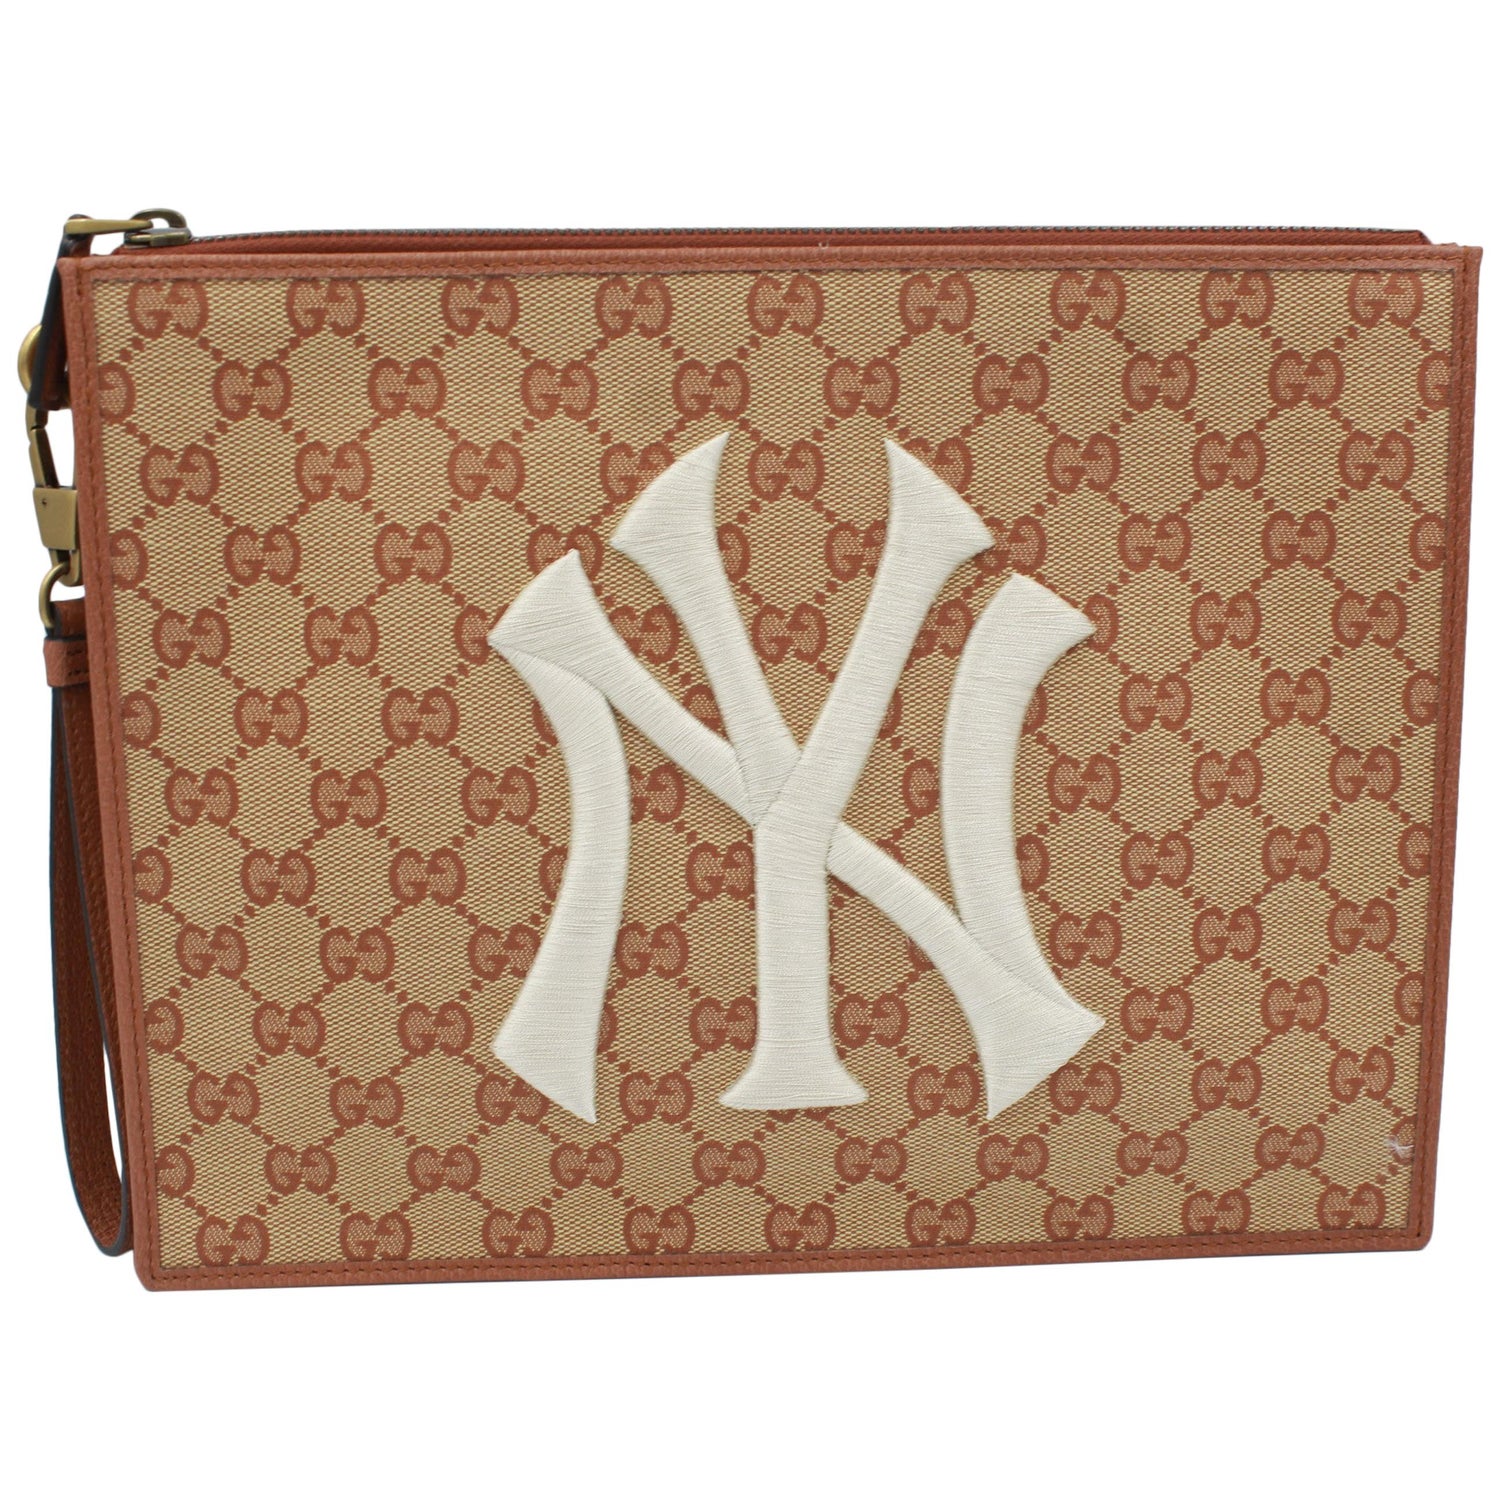 New York Gucci - 4 For Sale on 1stDibs